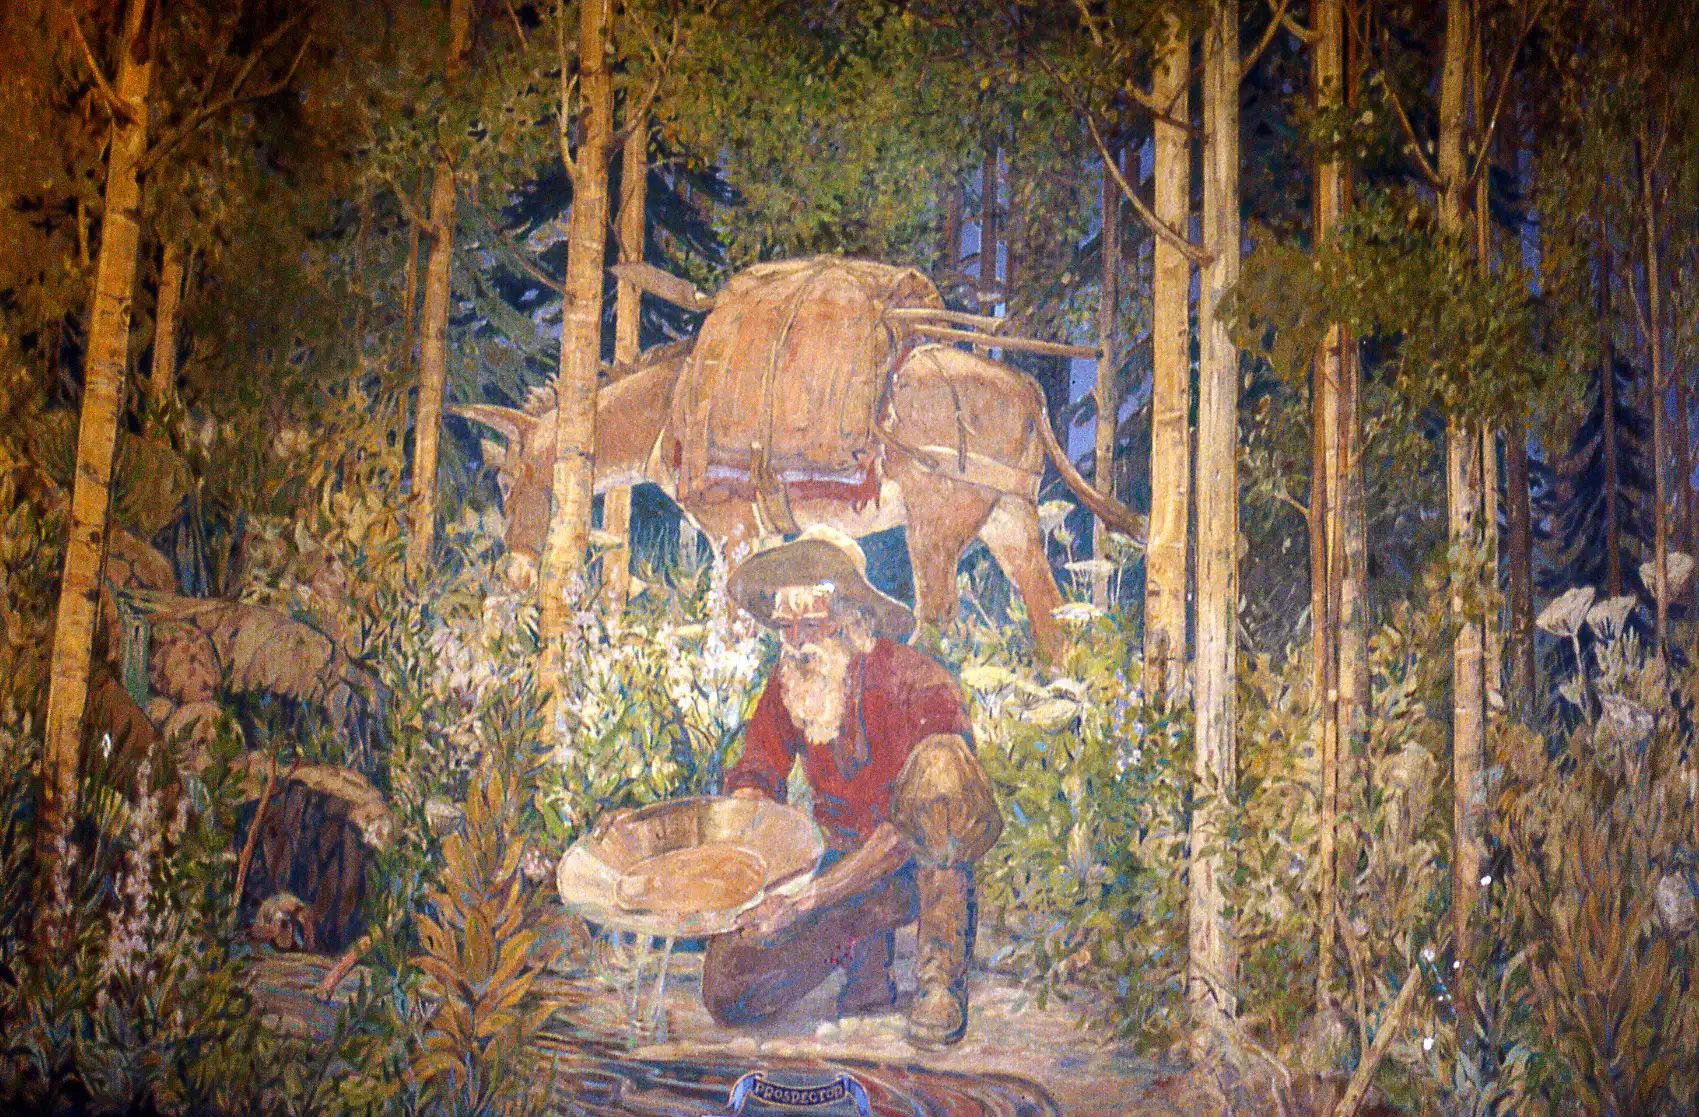 Painting of a bearded man crouching down and panning for gold in a thick forest. A horse is behind him with a large pack on its back.